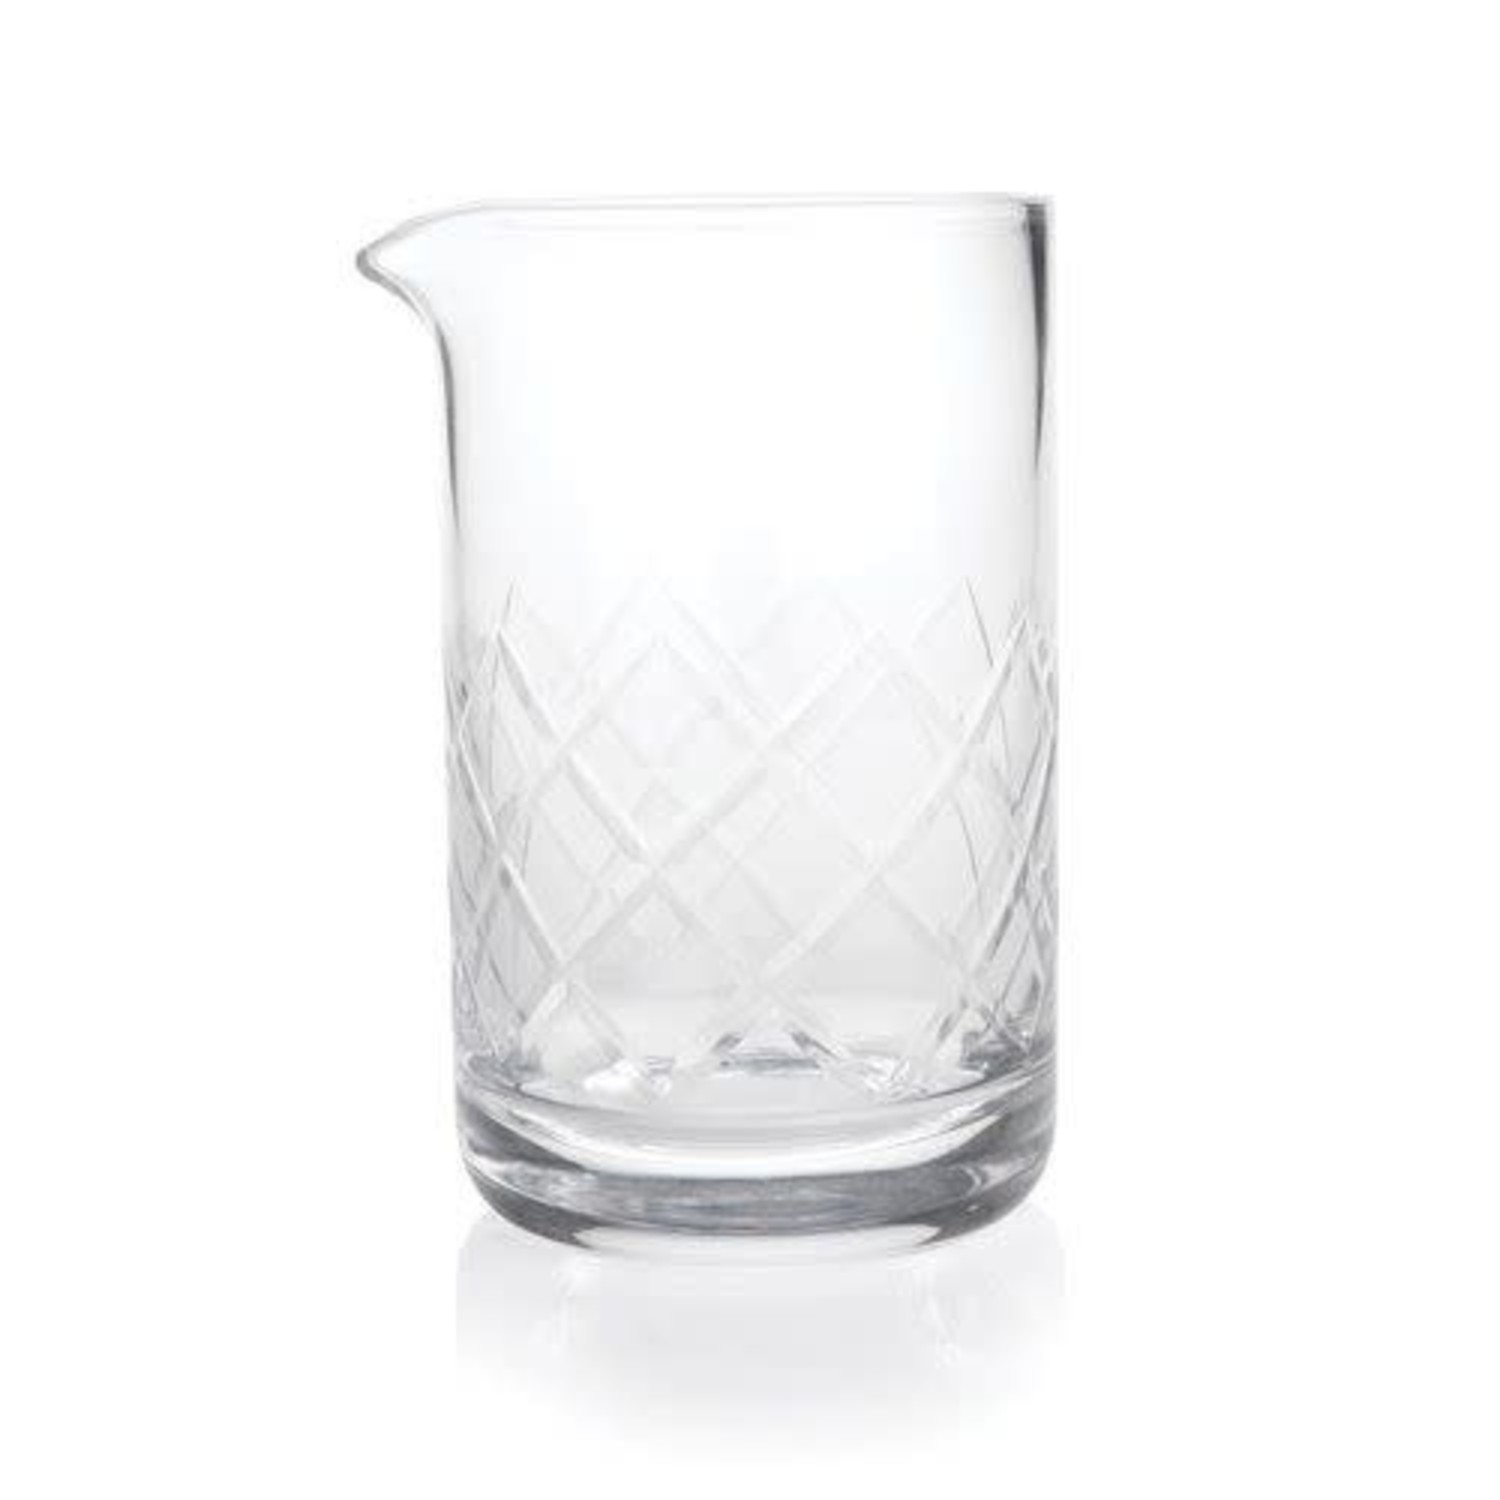 Seamless Mixing Glass, Barware, Bar Products, Glassware